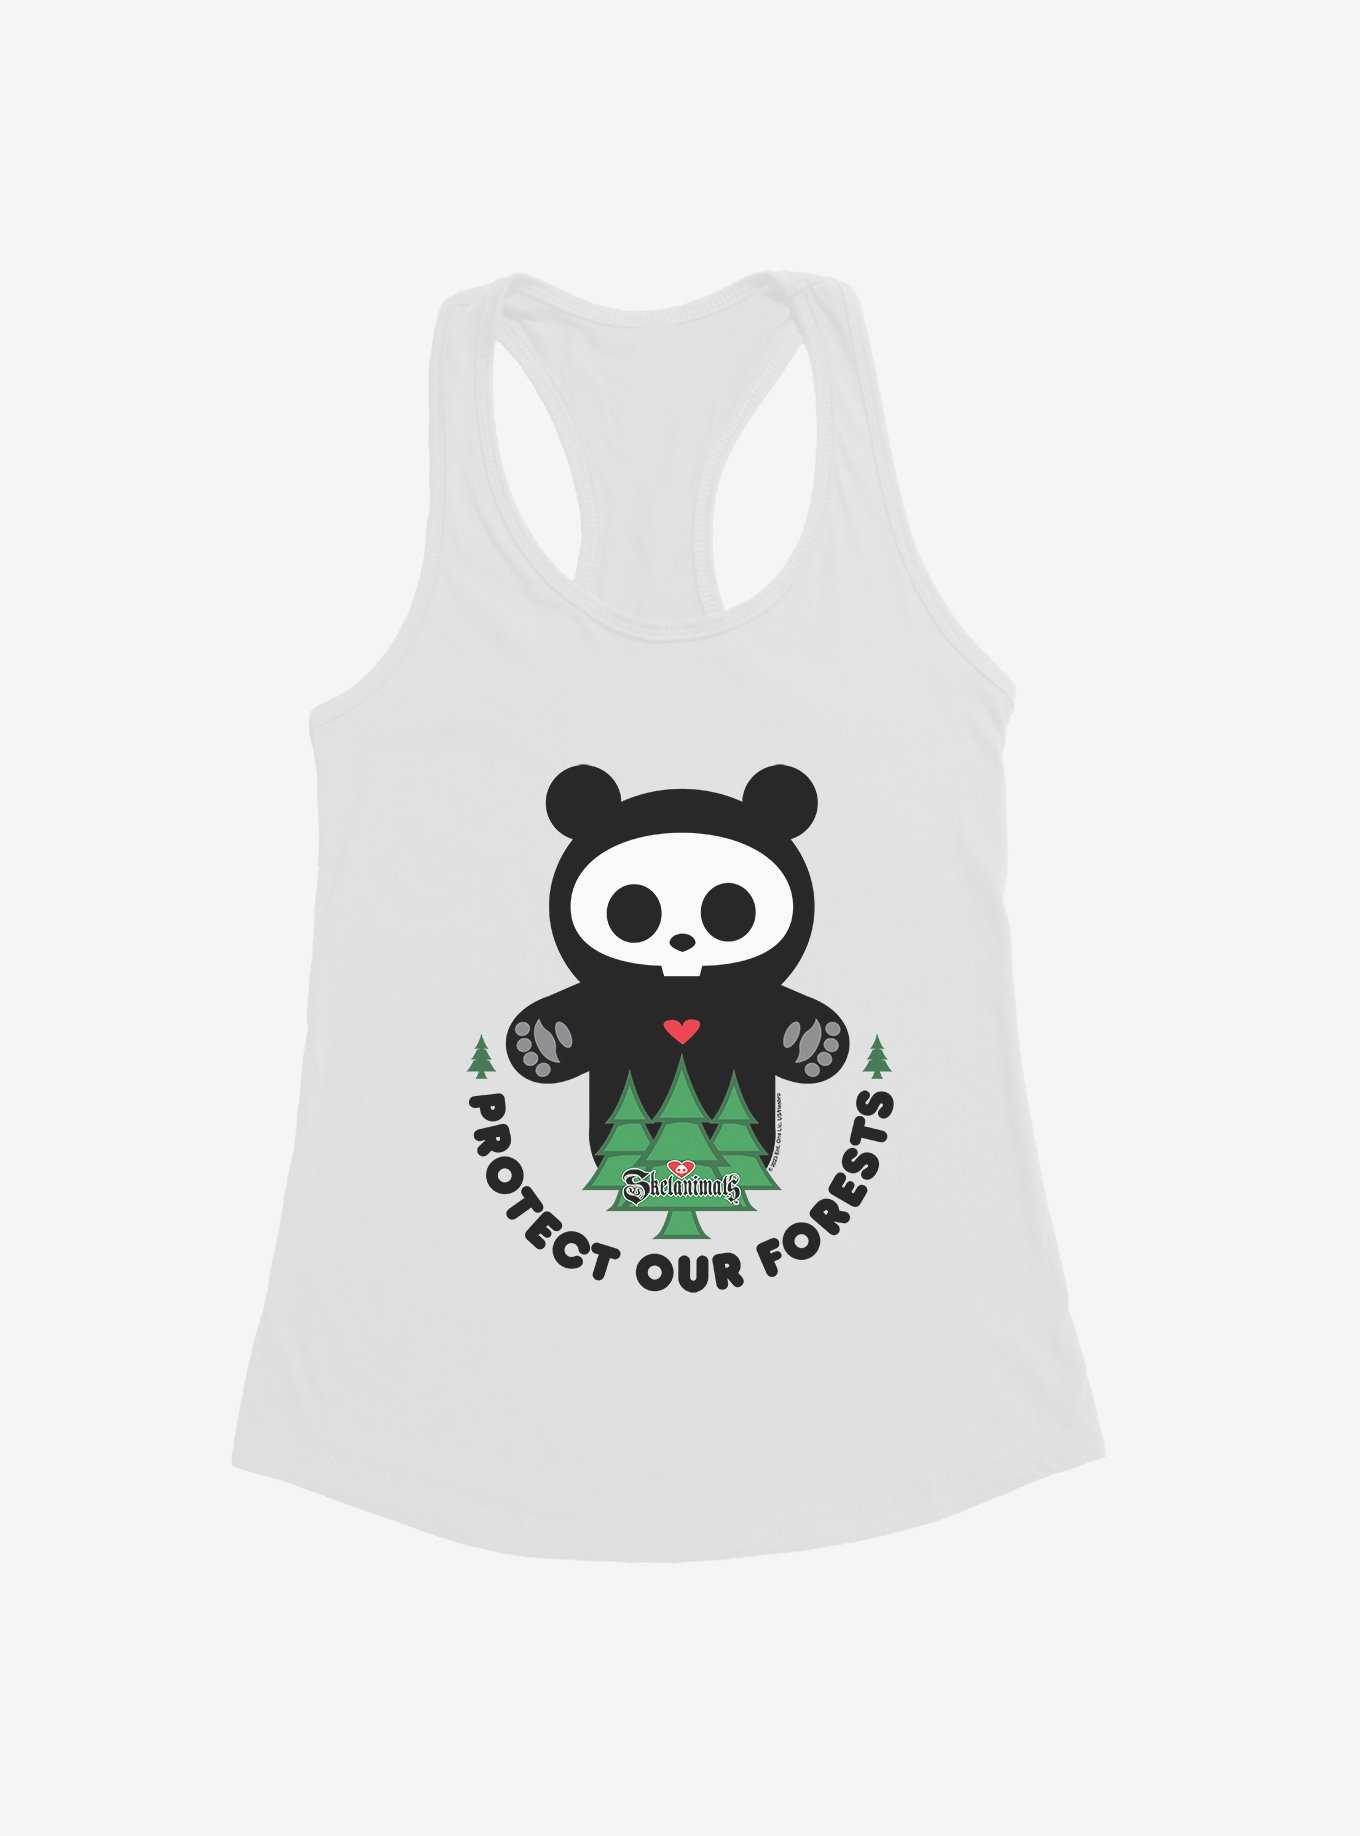 Skelanimals ChungKee Protect Our Forests Girls Tank, , hi-res